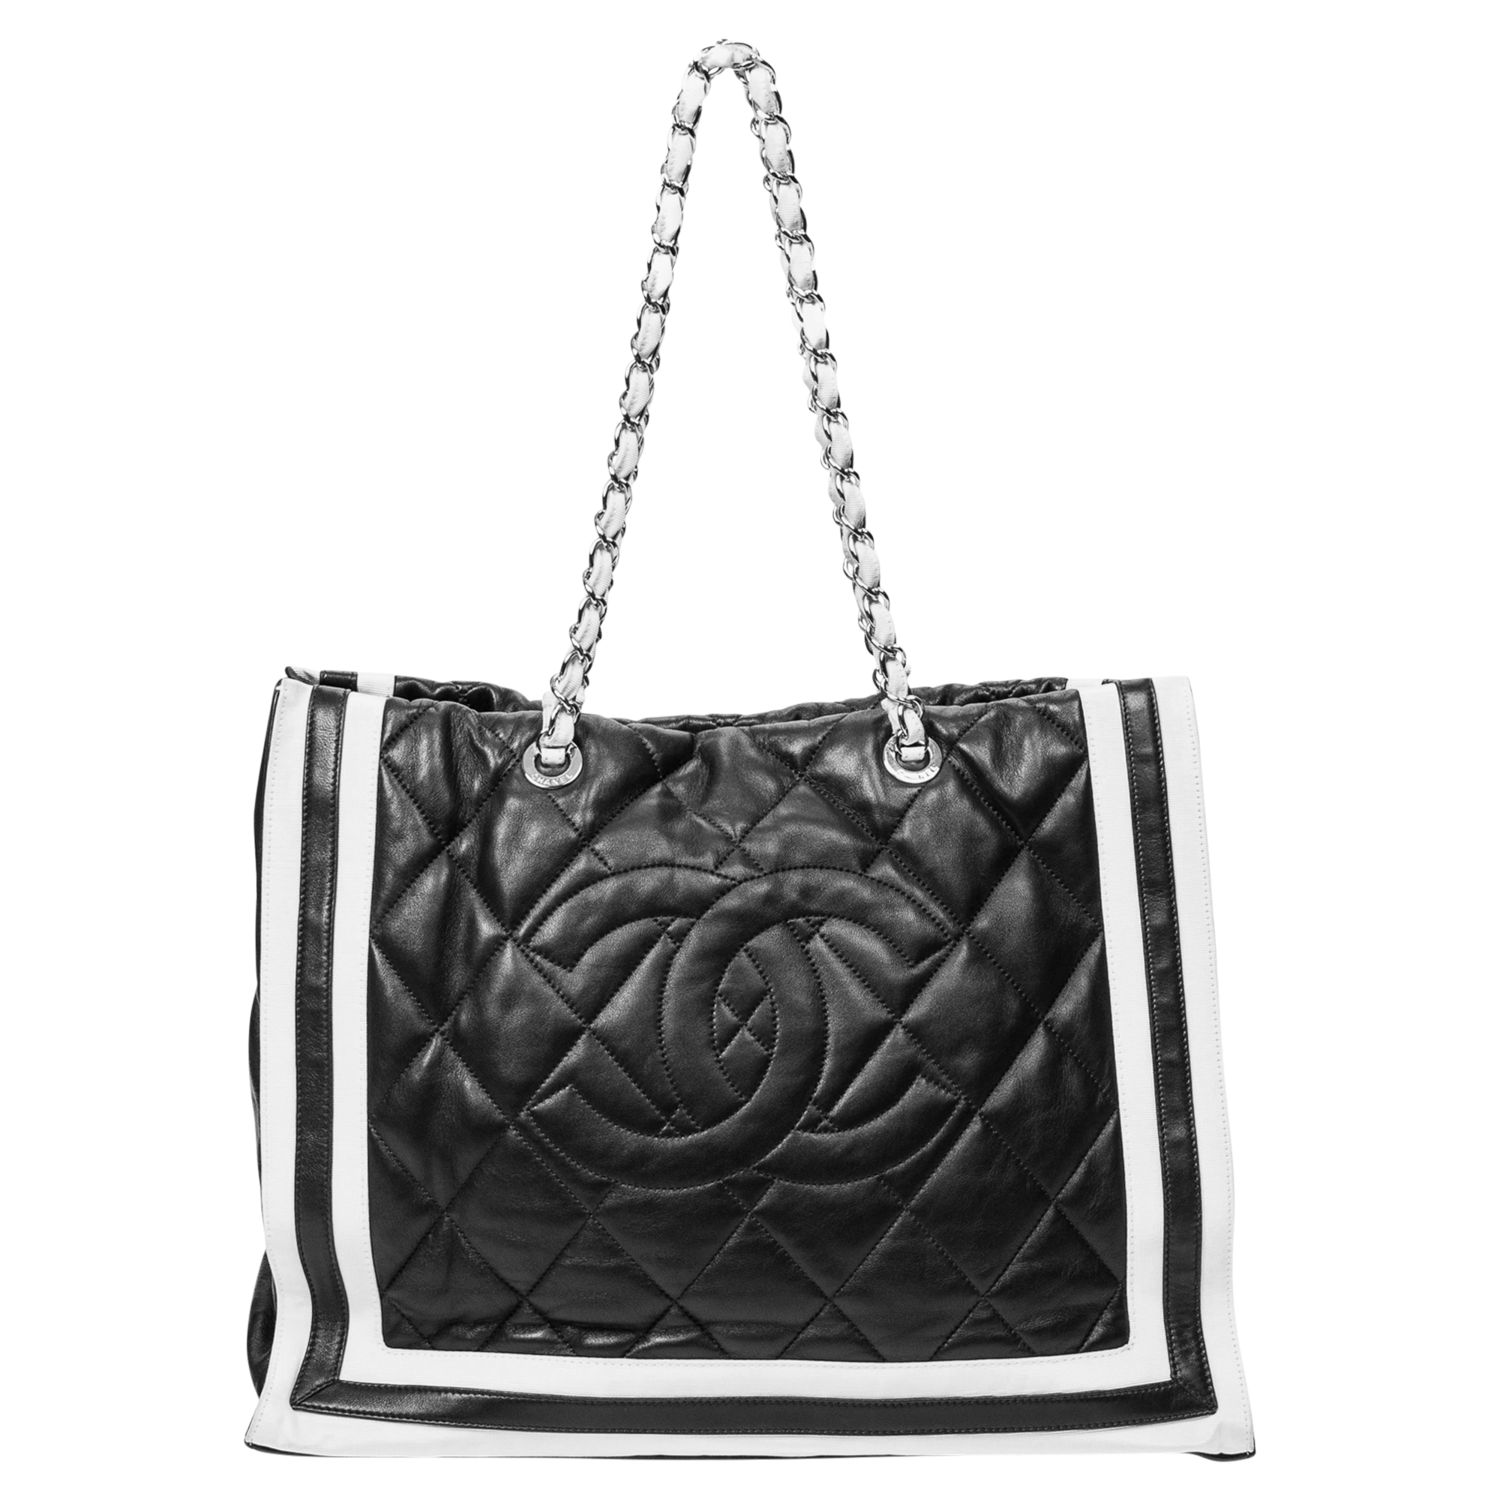 Chanel 2009 Navy Large CC Chain Tote